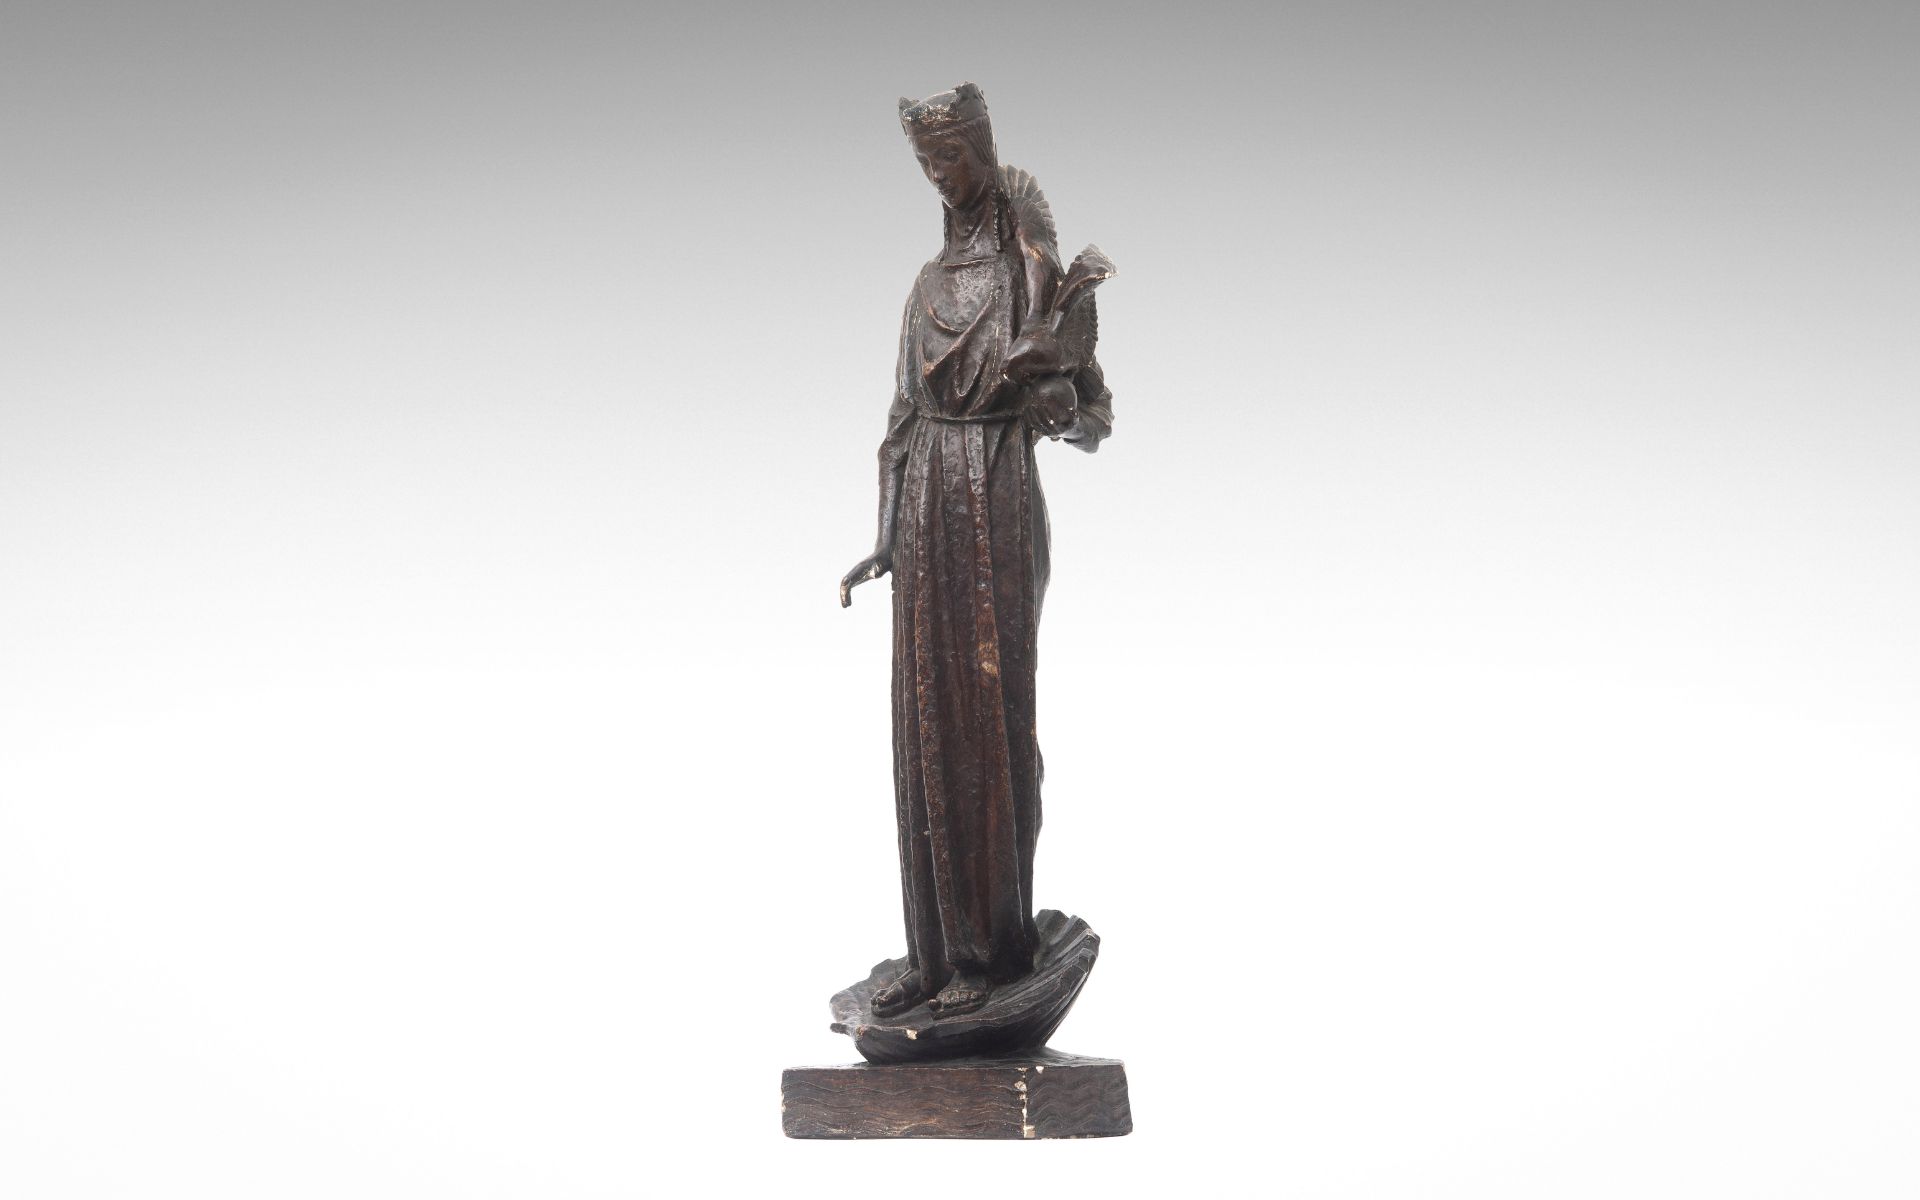 SIR WILLIAM REID DICK R.A. (BRITISH, 1879-1961): 'OUR LADY OF LIVERPOOL', PLASTER MAQUETTE